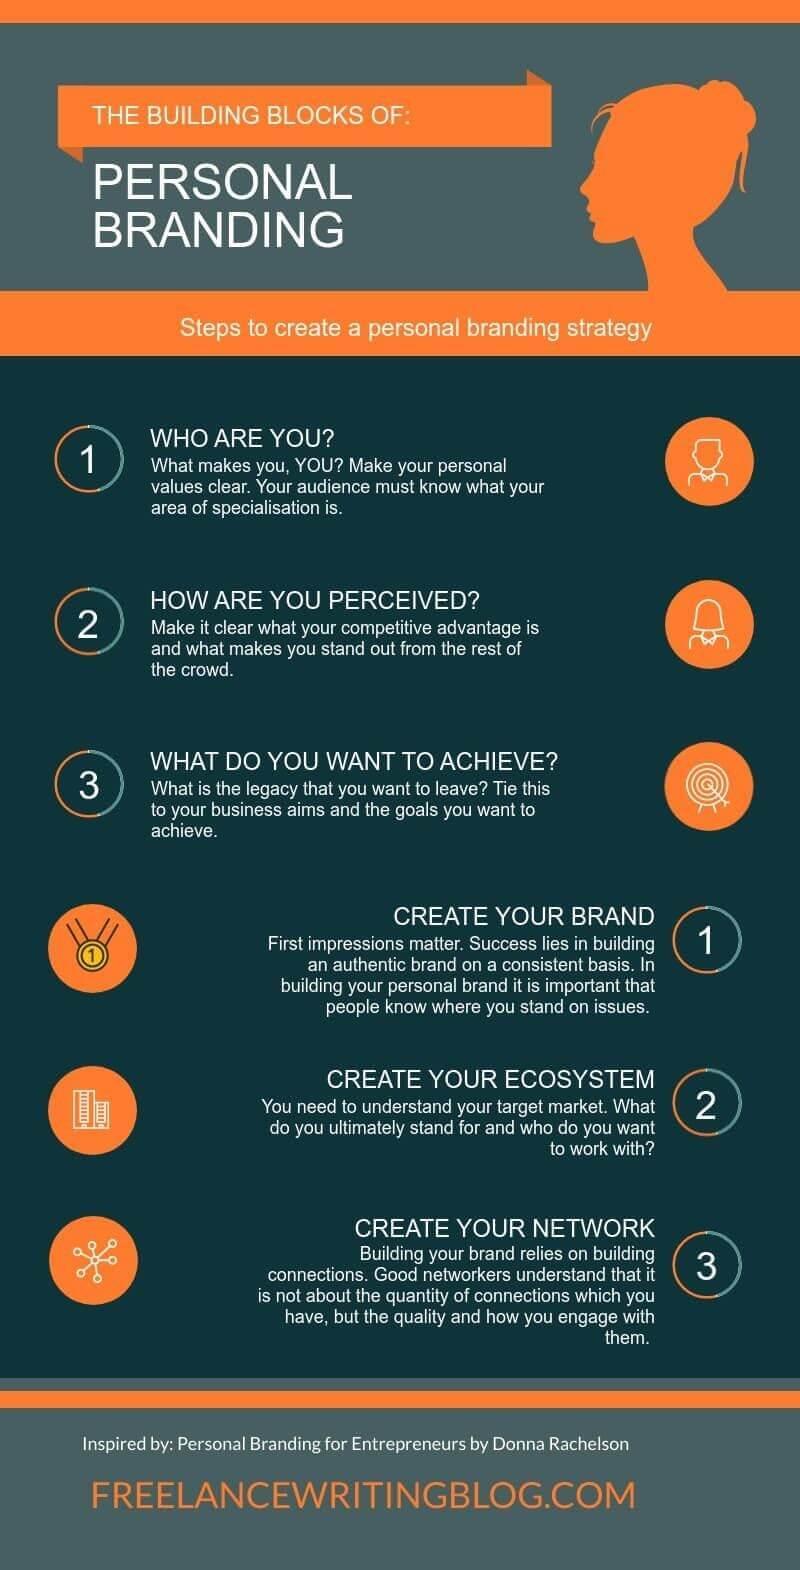 Personal branding to build a marketing strategy